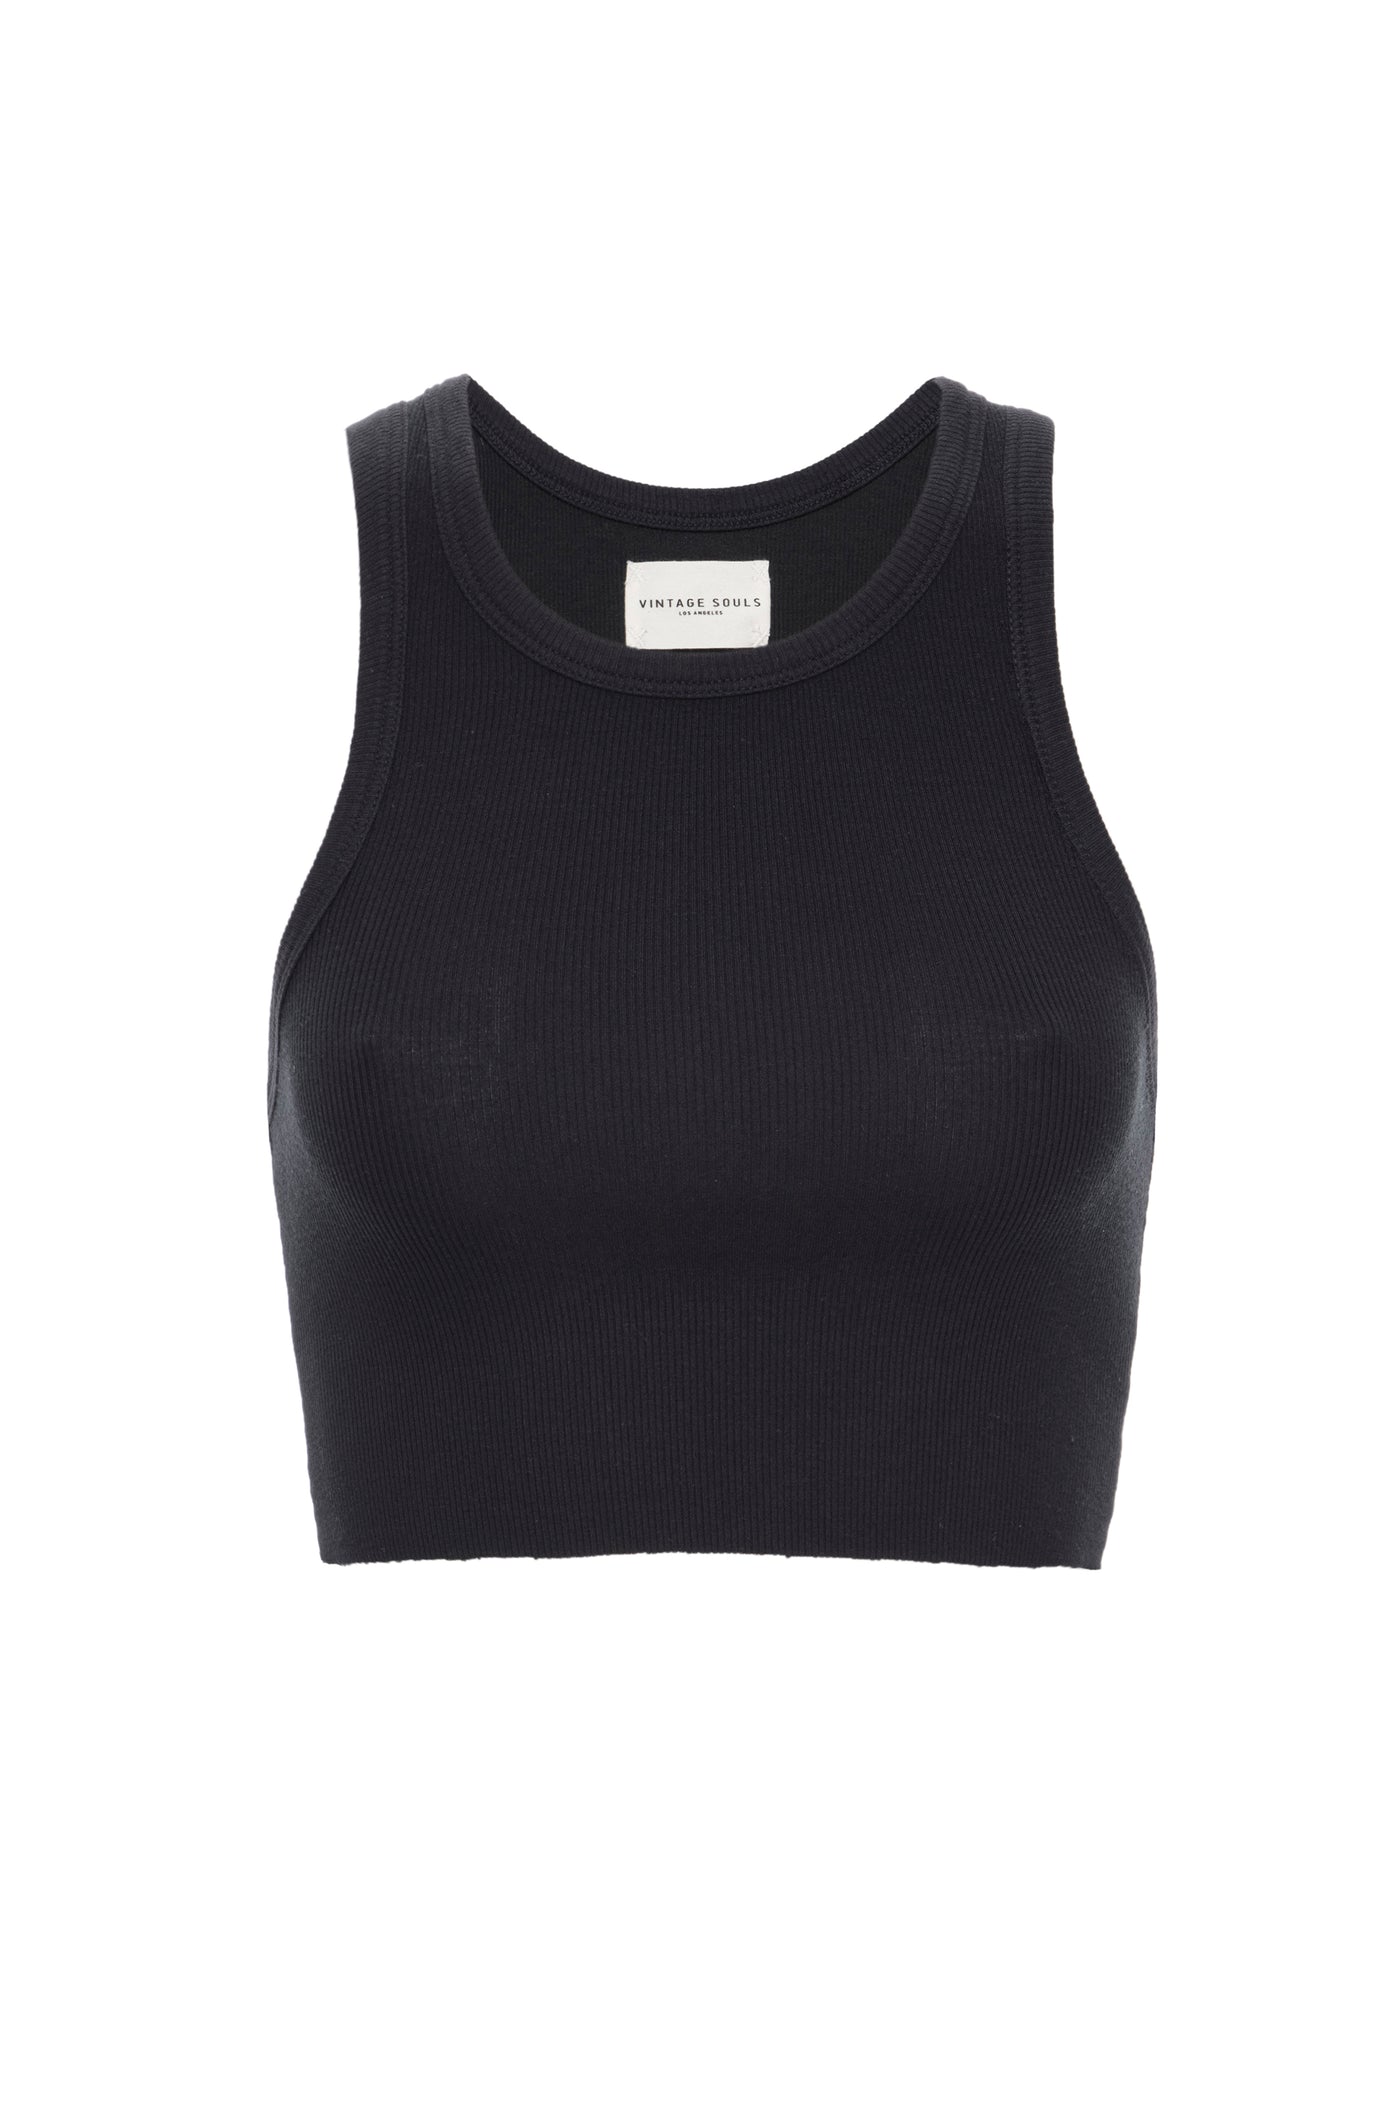 Classic Crop Tank in Black displayed solo, showcasing its sleek design and ultra-soft texture.